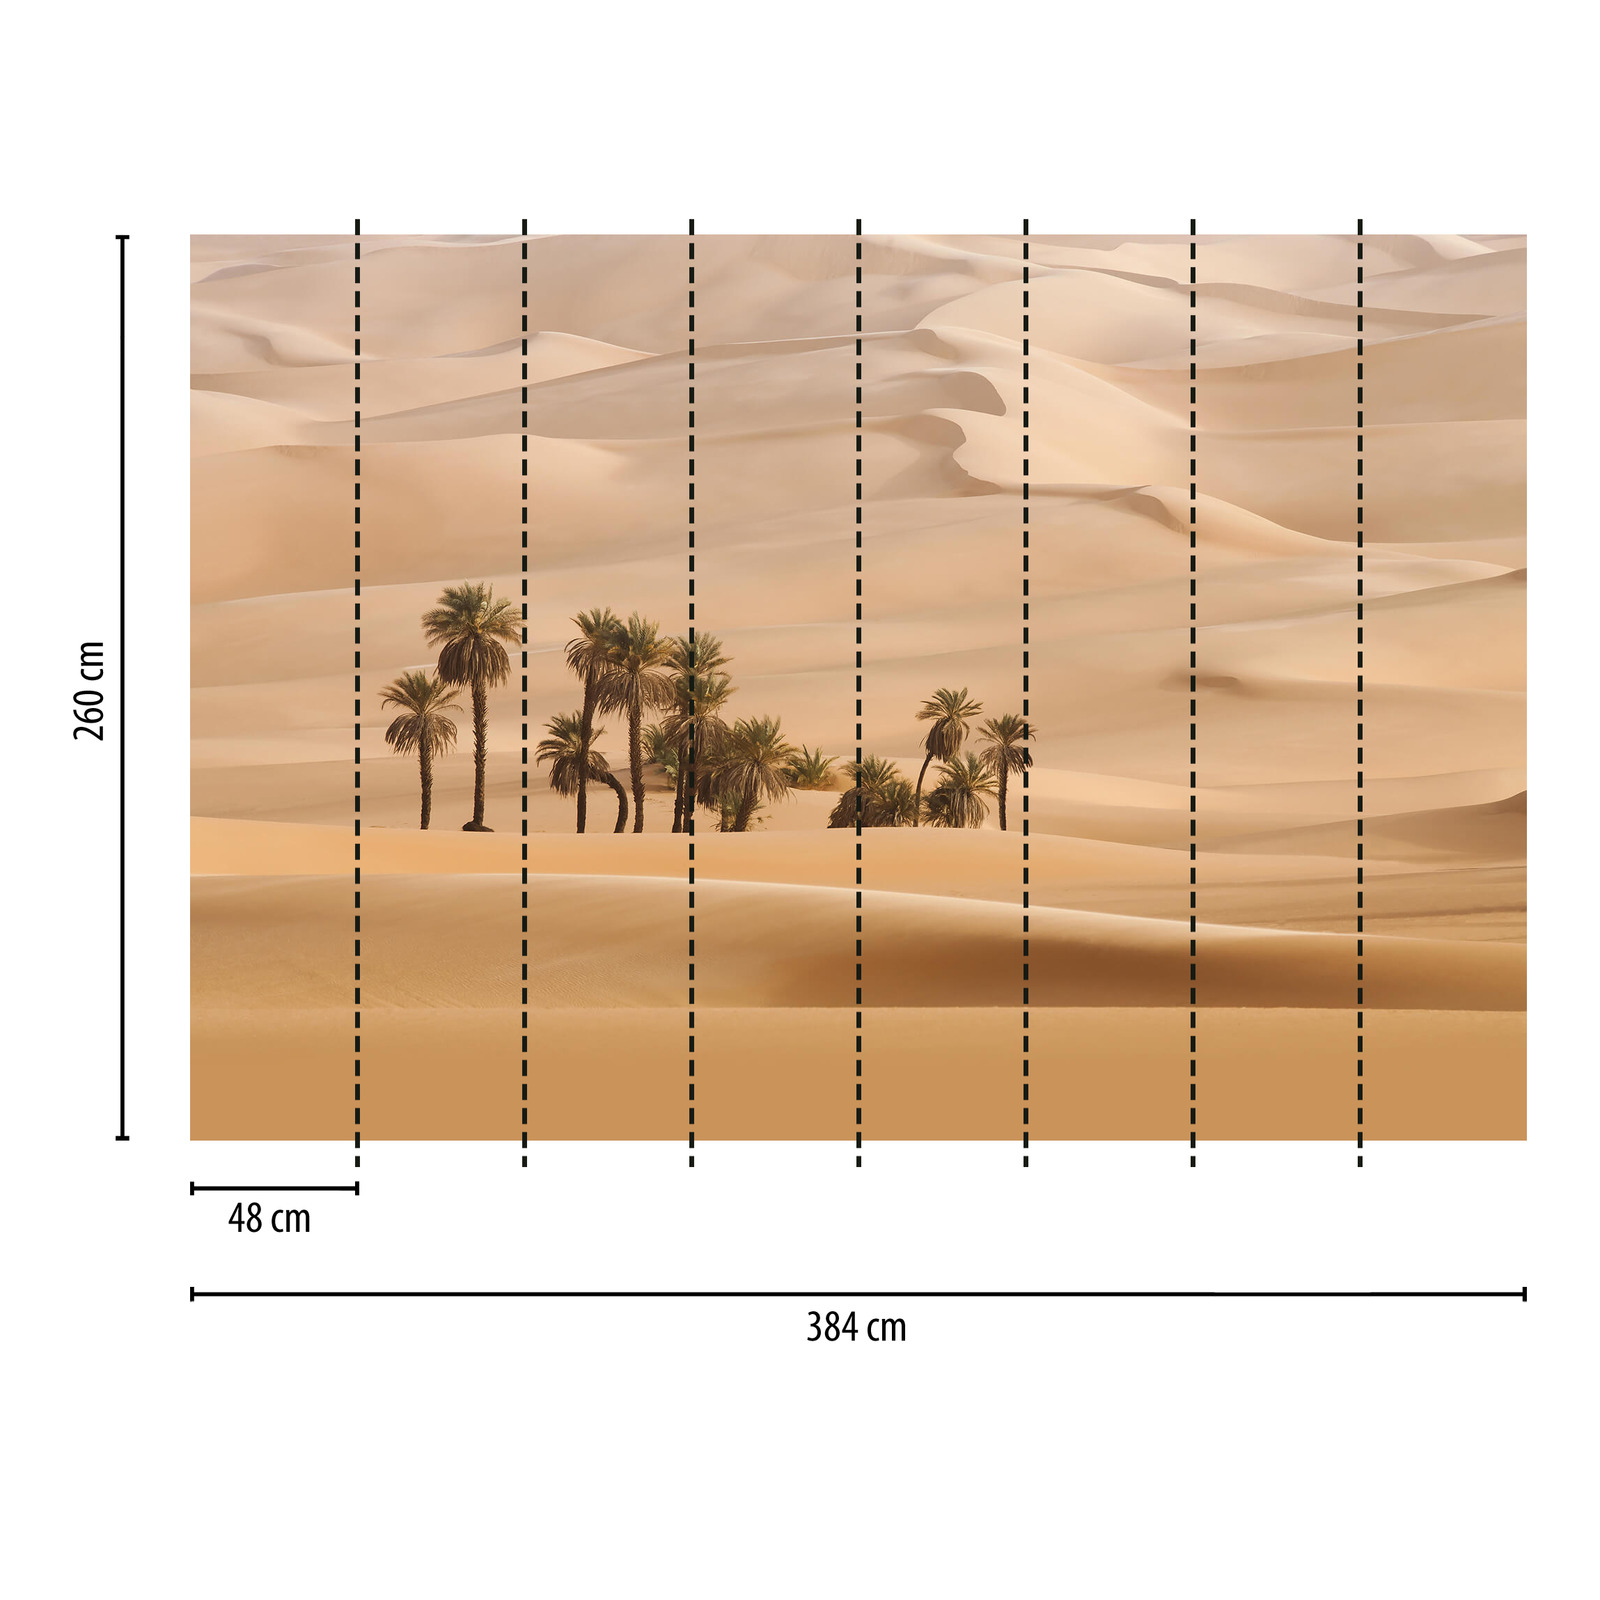             Photo wallpaper desert with palm trees - beige
        